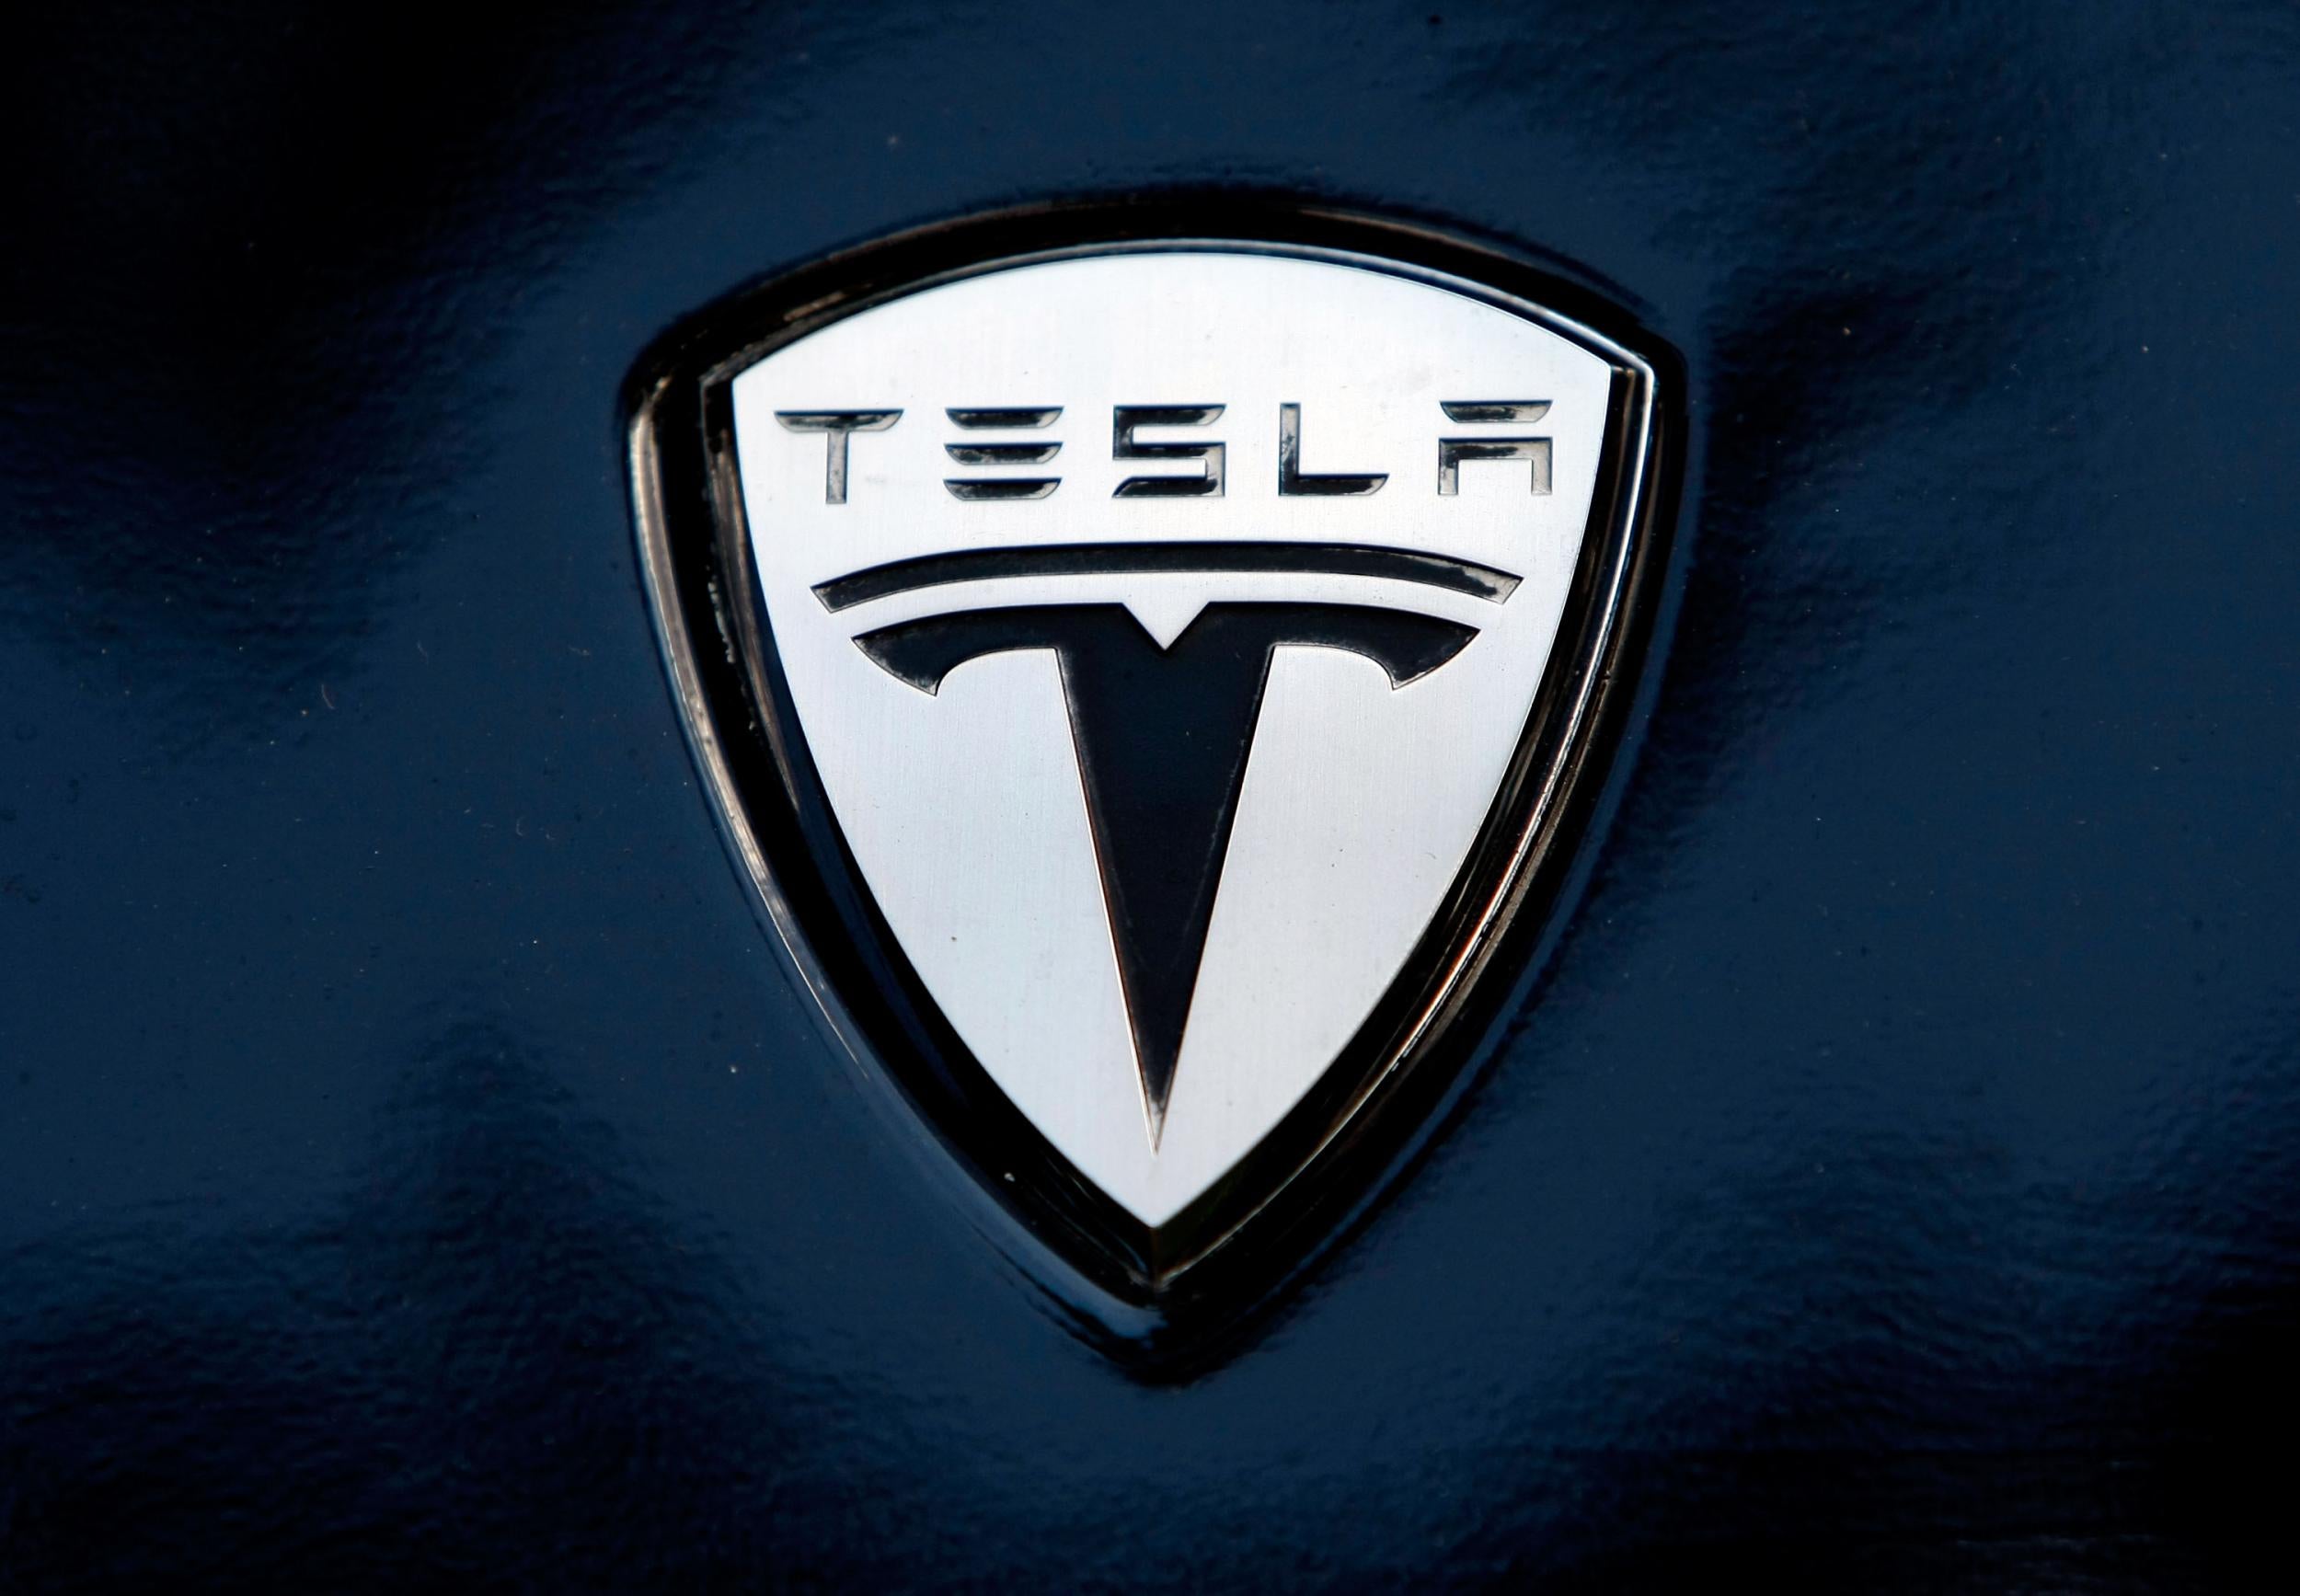 The Tesla logo on the bonnet of one of the company's electric cars